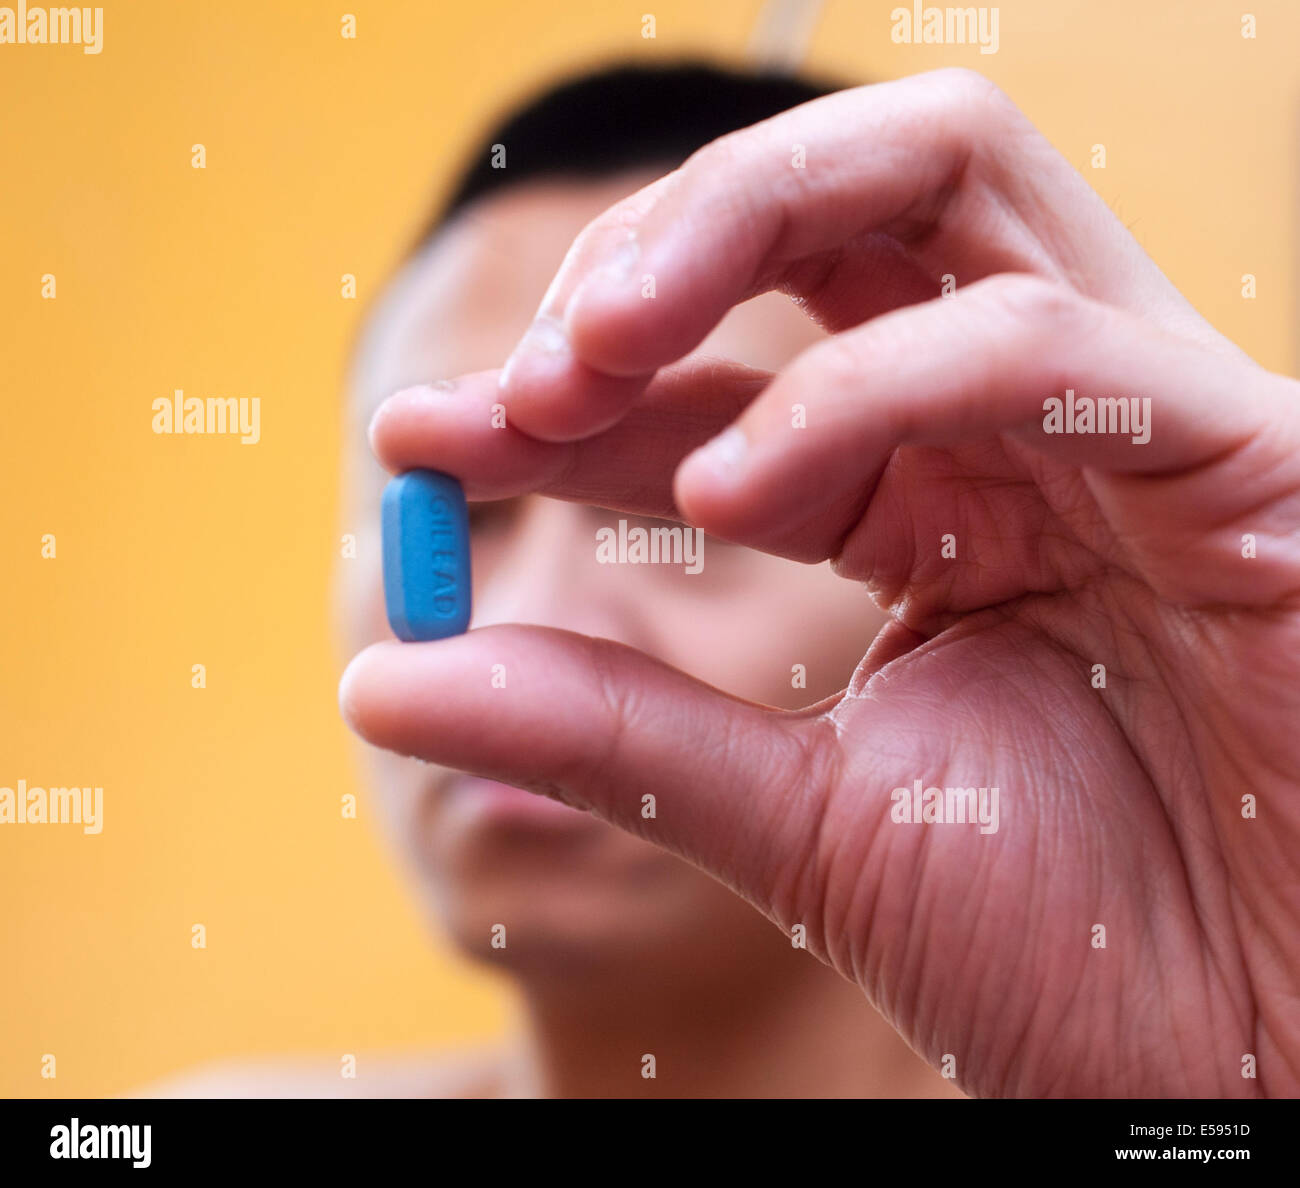 Man Holding Truvada Pill, HIV Anti-Viral medication, in Hand, AIDS HIV Prevention  PrEP 'Pre Exposure Prophylaxis' Close up Tablets, Clinical research trials, pharma industry Stock Photo